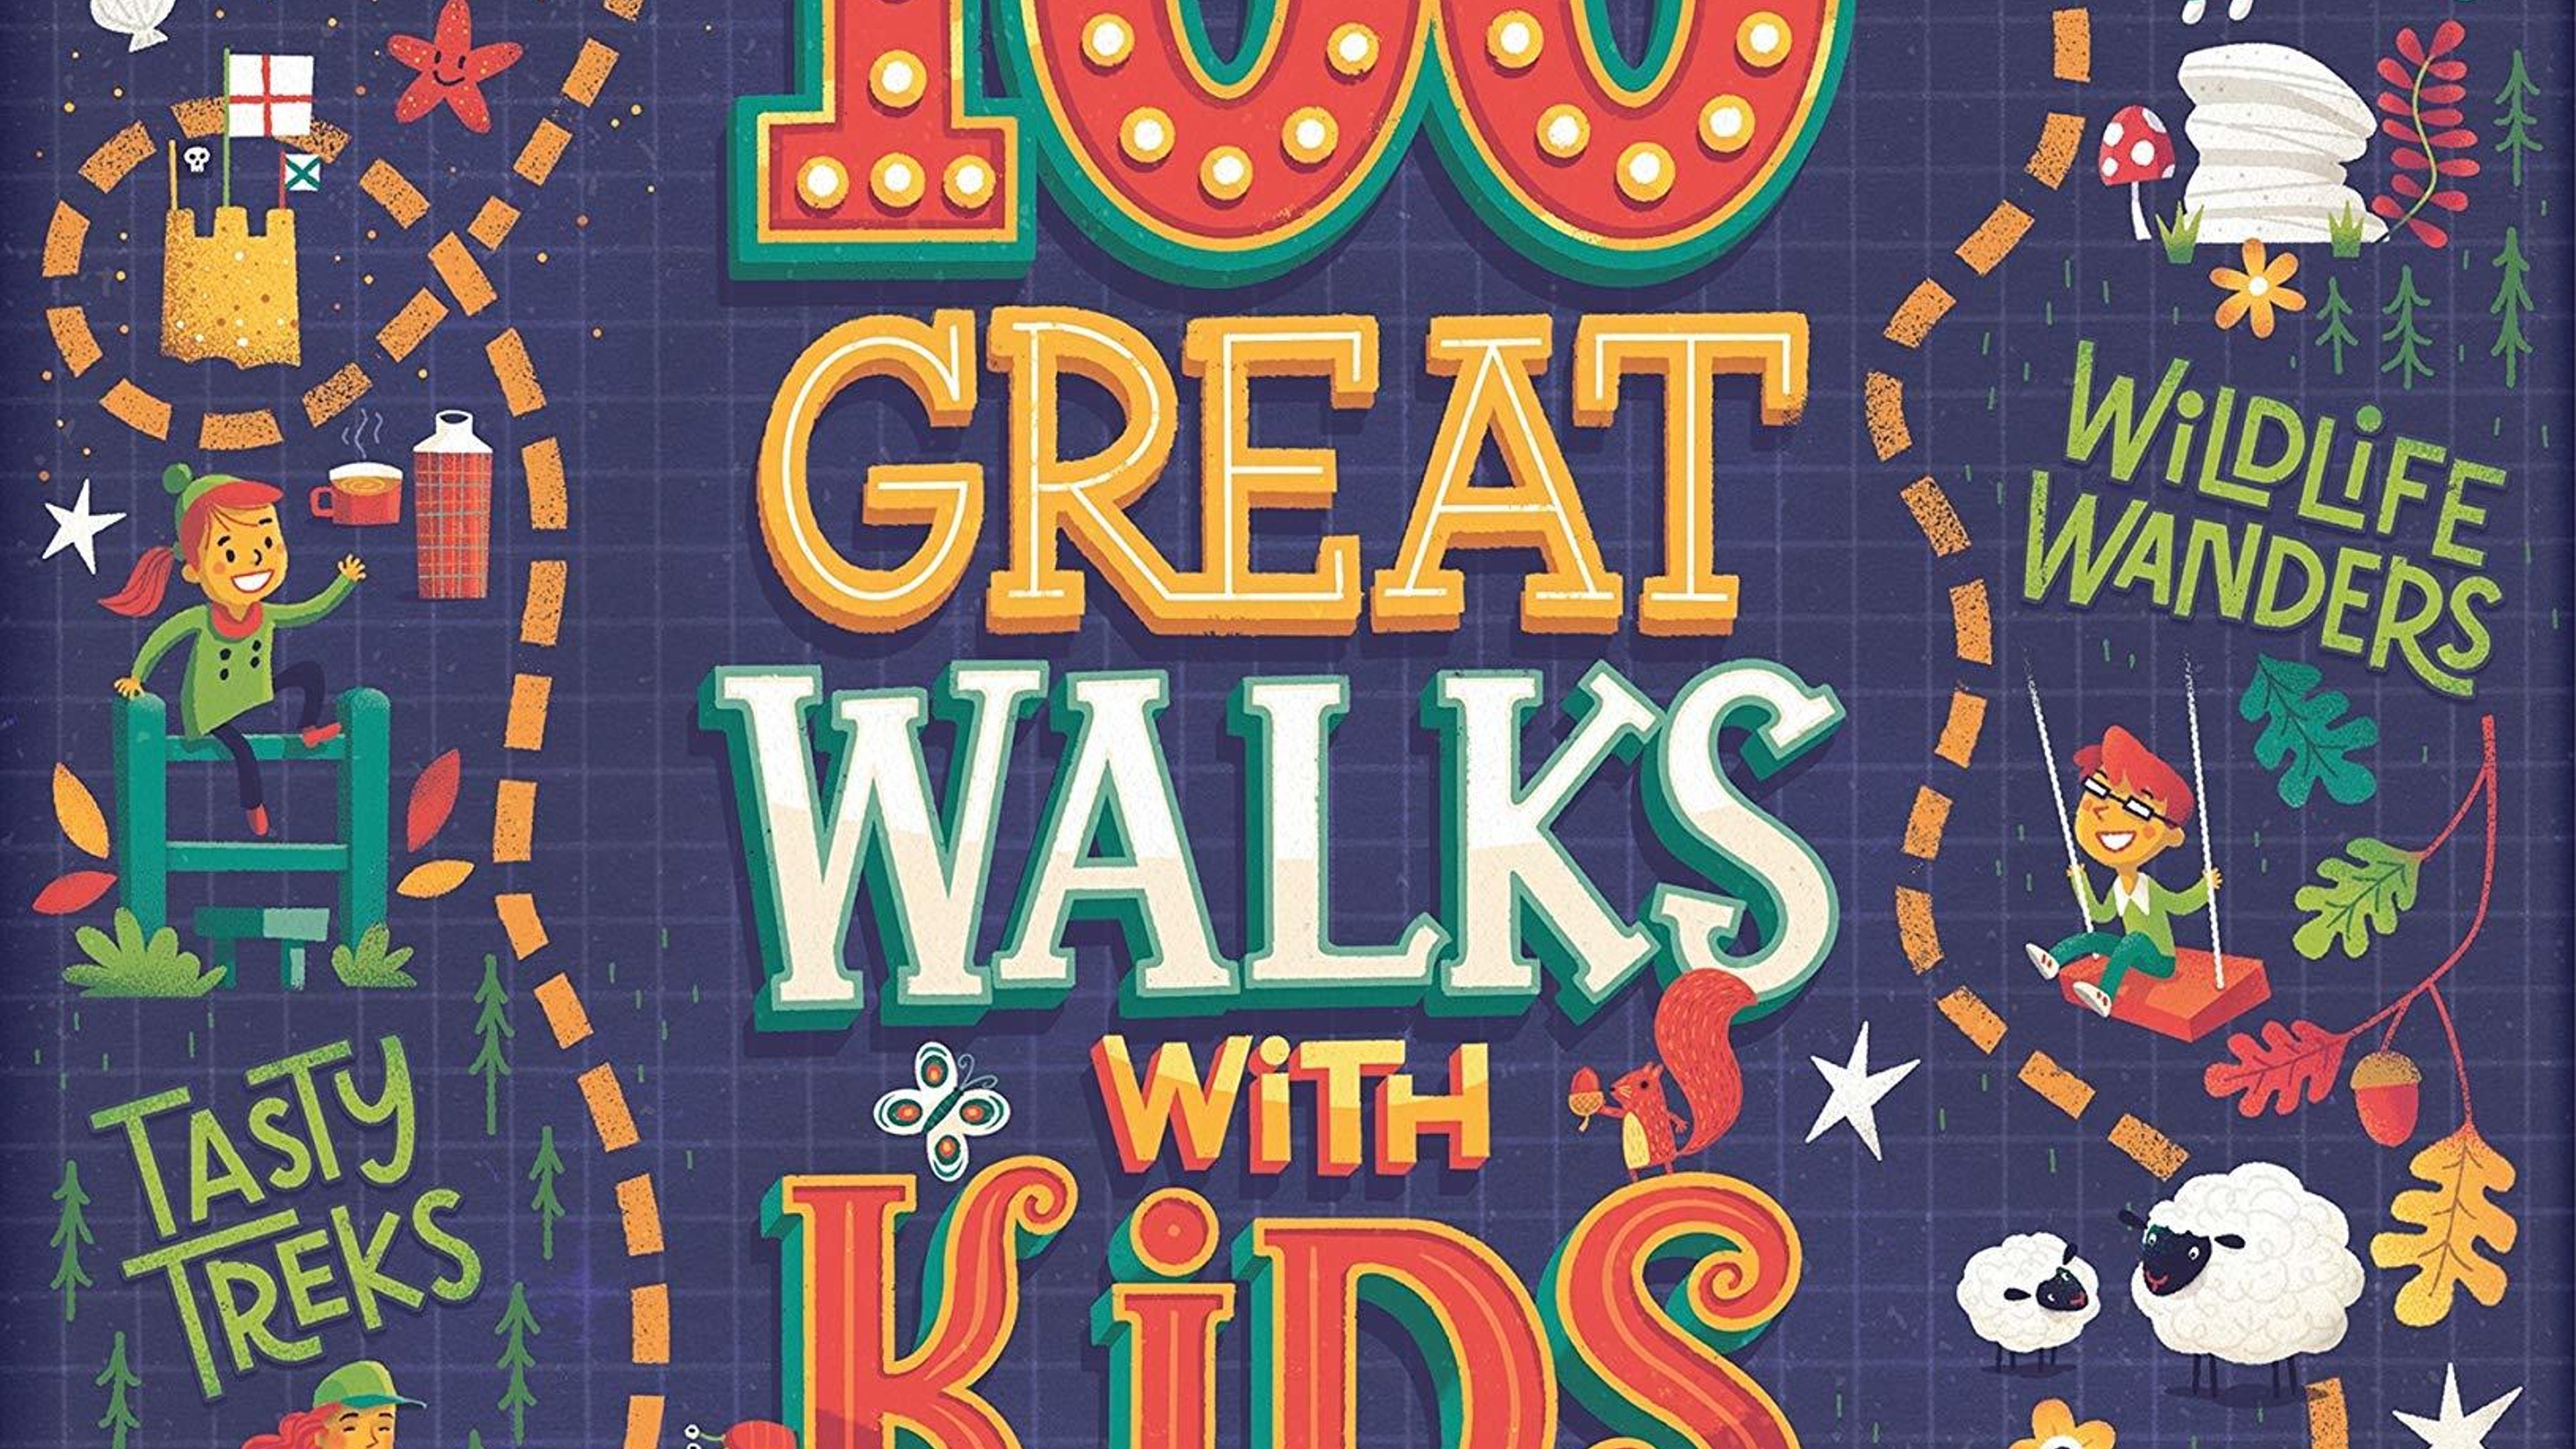 100 Great Walks With Kids